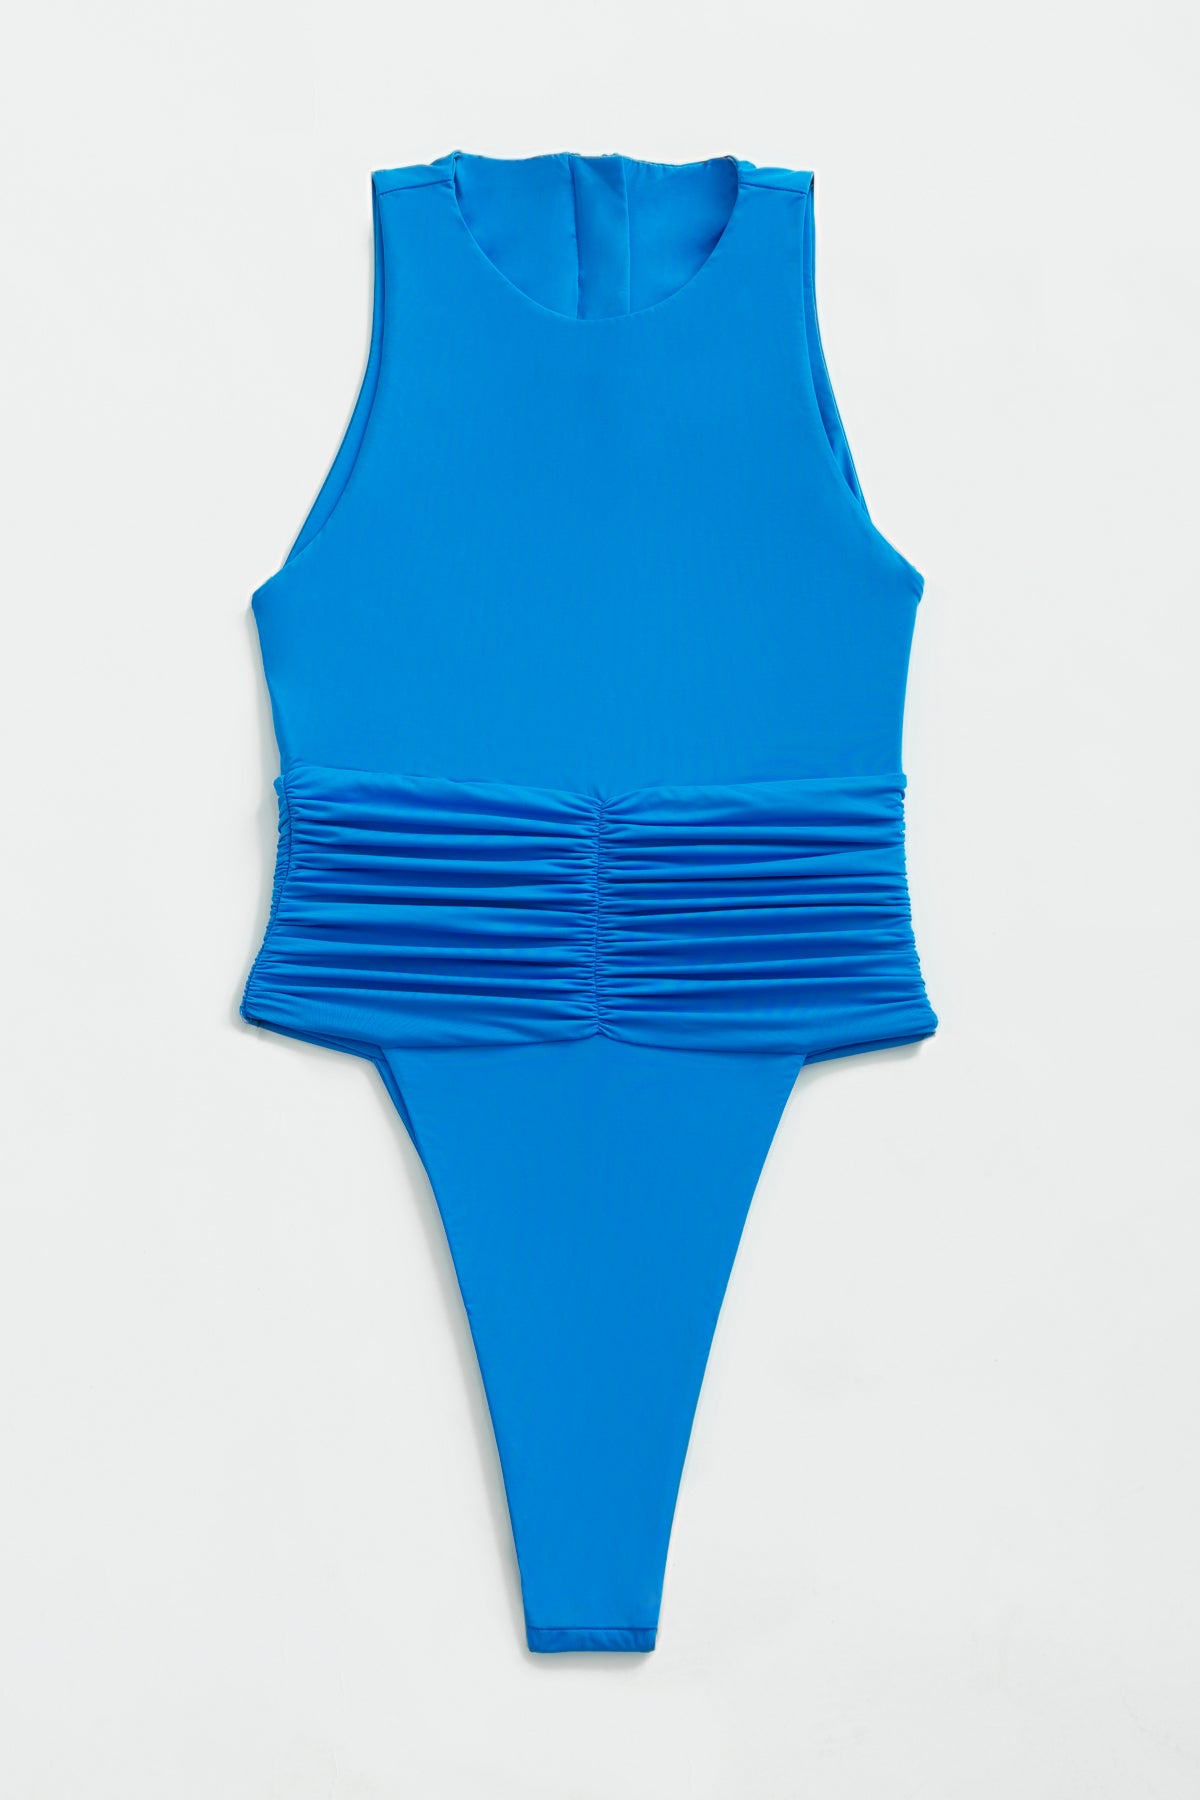 Jace Thong One Piece - Ocean Water